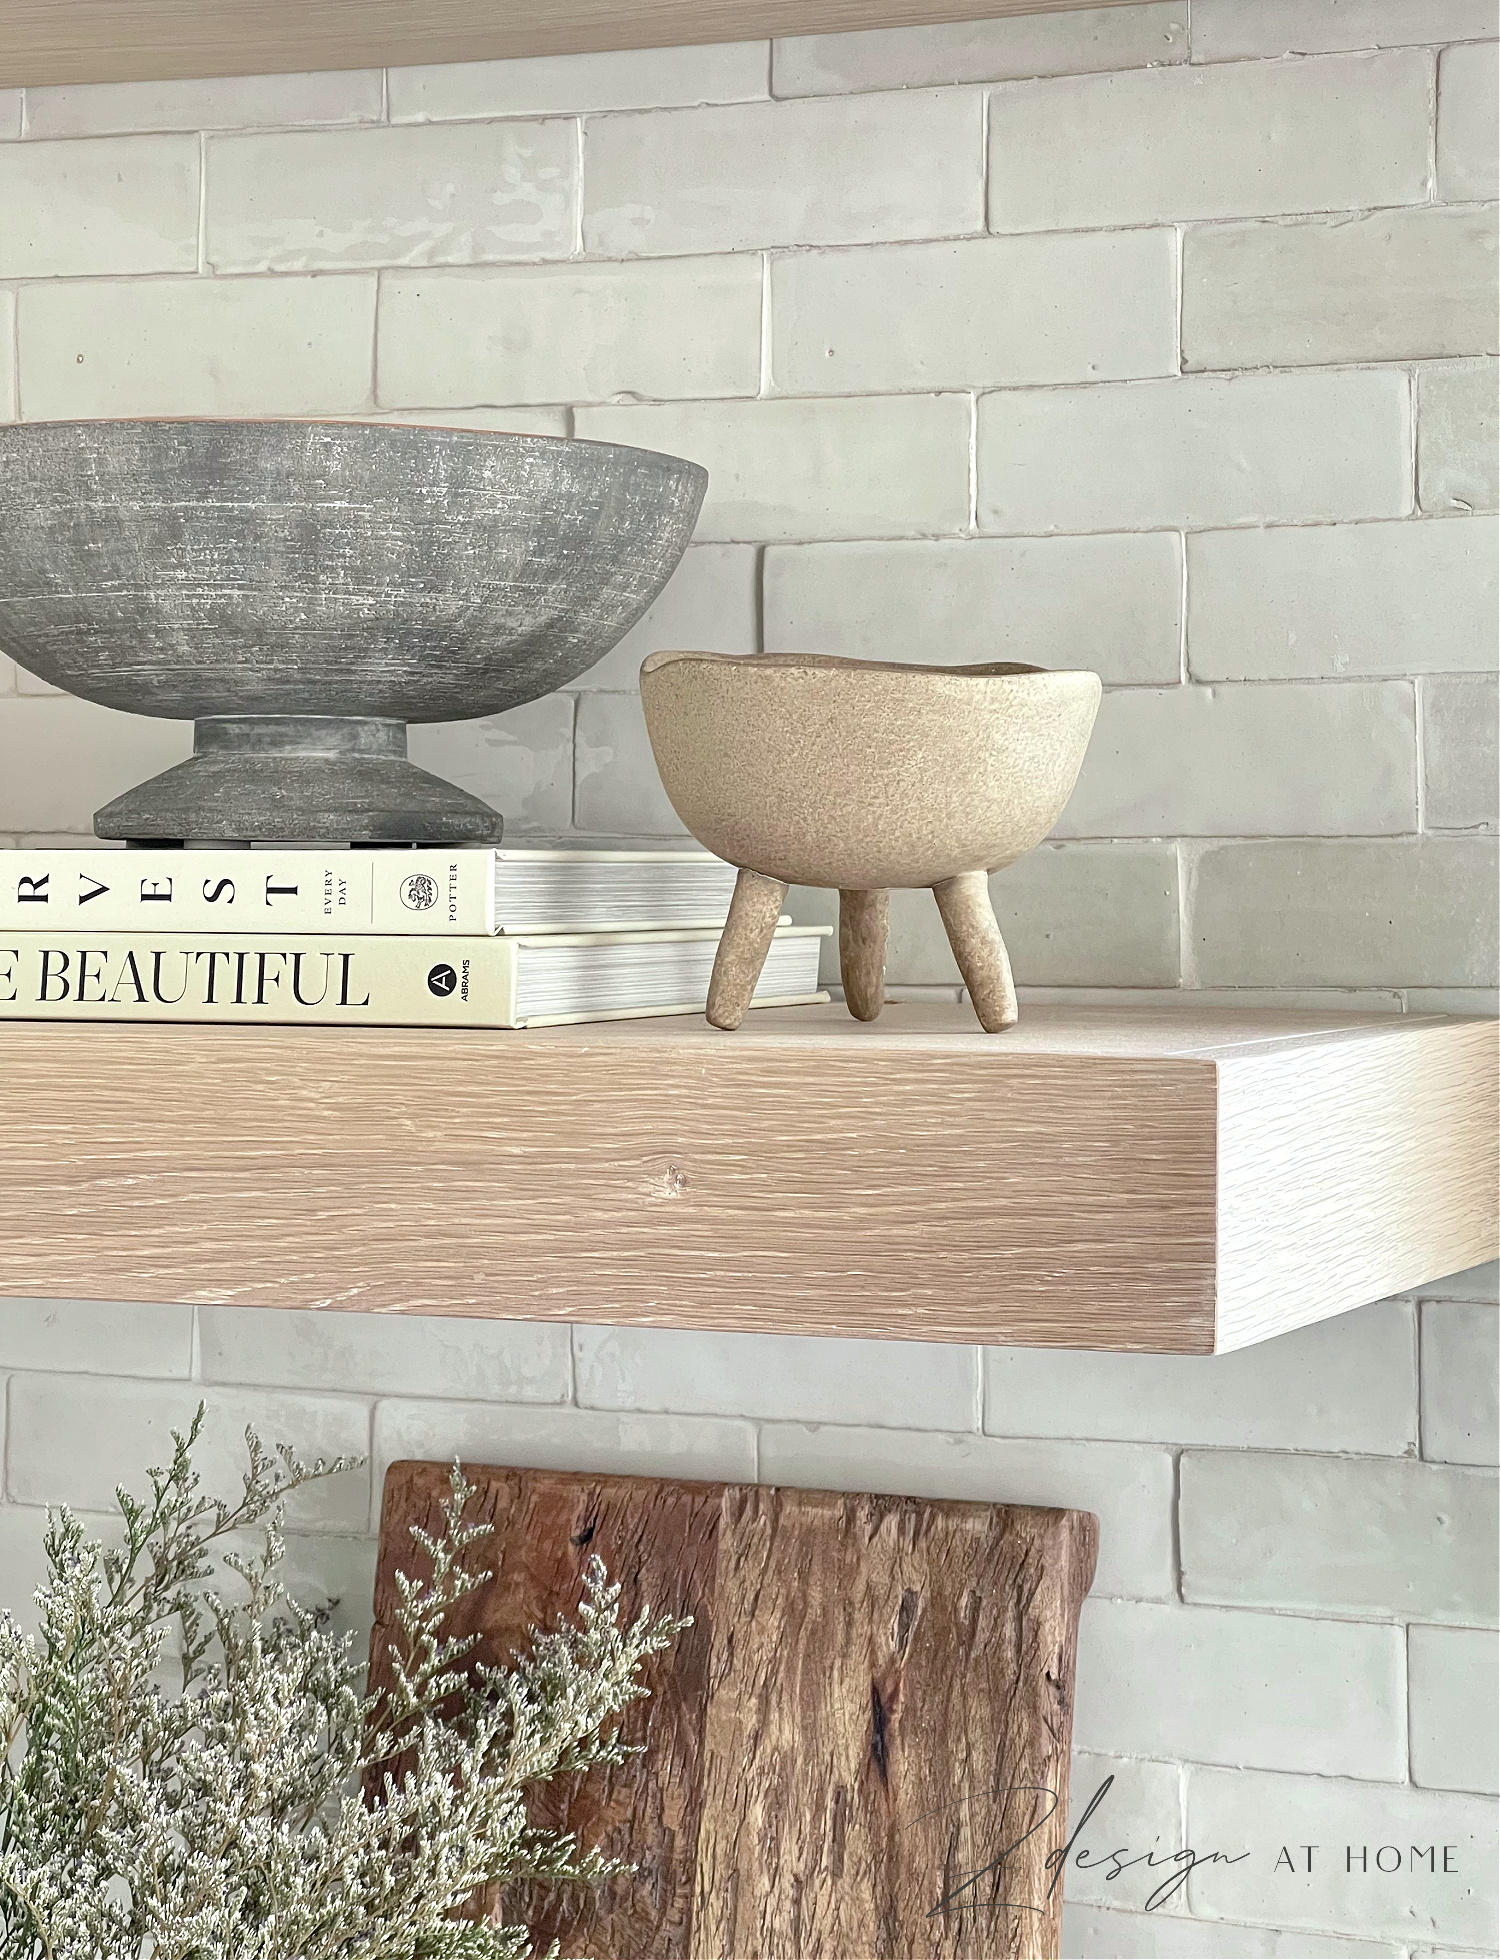 amazon footed bowl styled on kitchen shelves 